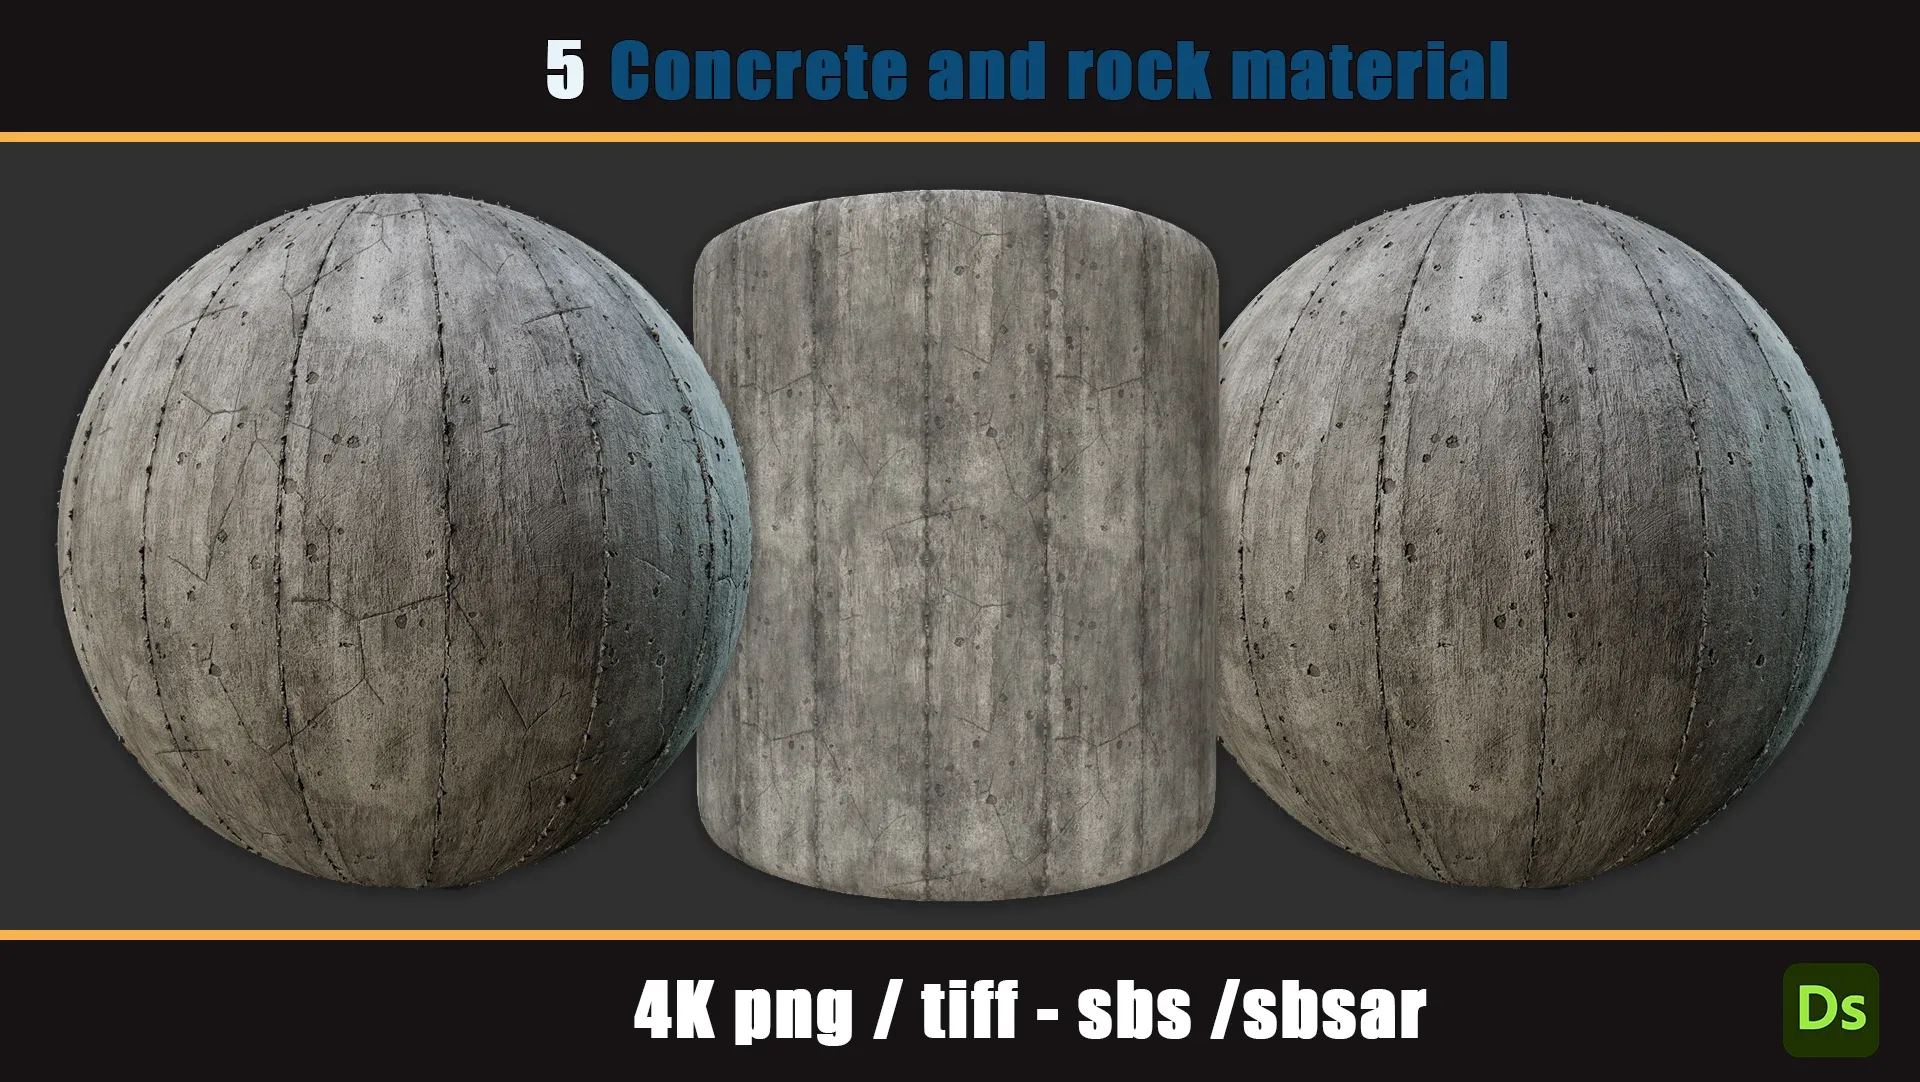 5 PBR concrete and rock material 4k PNG, TIFF, SBS, SBSAR